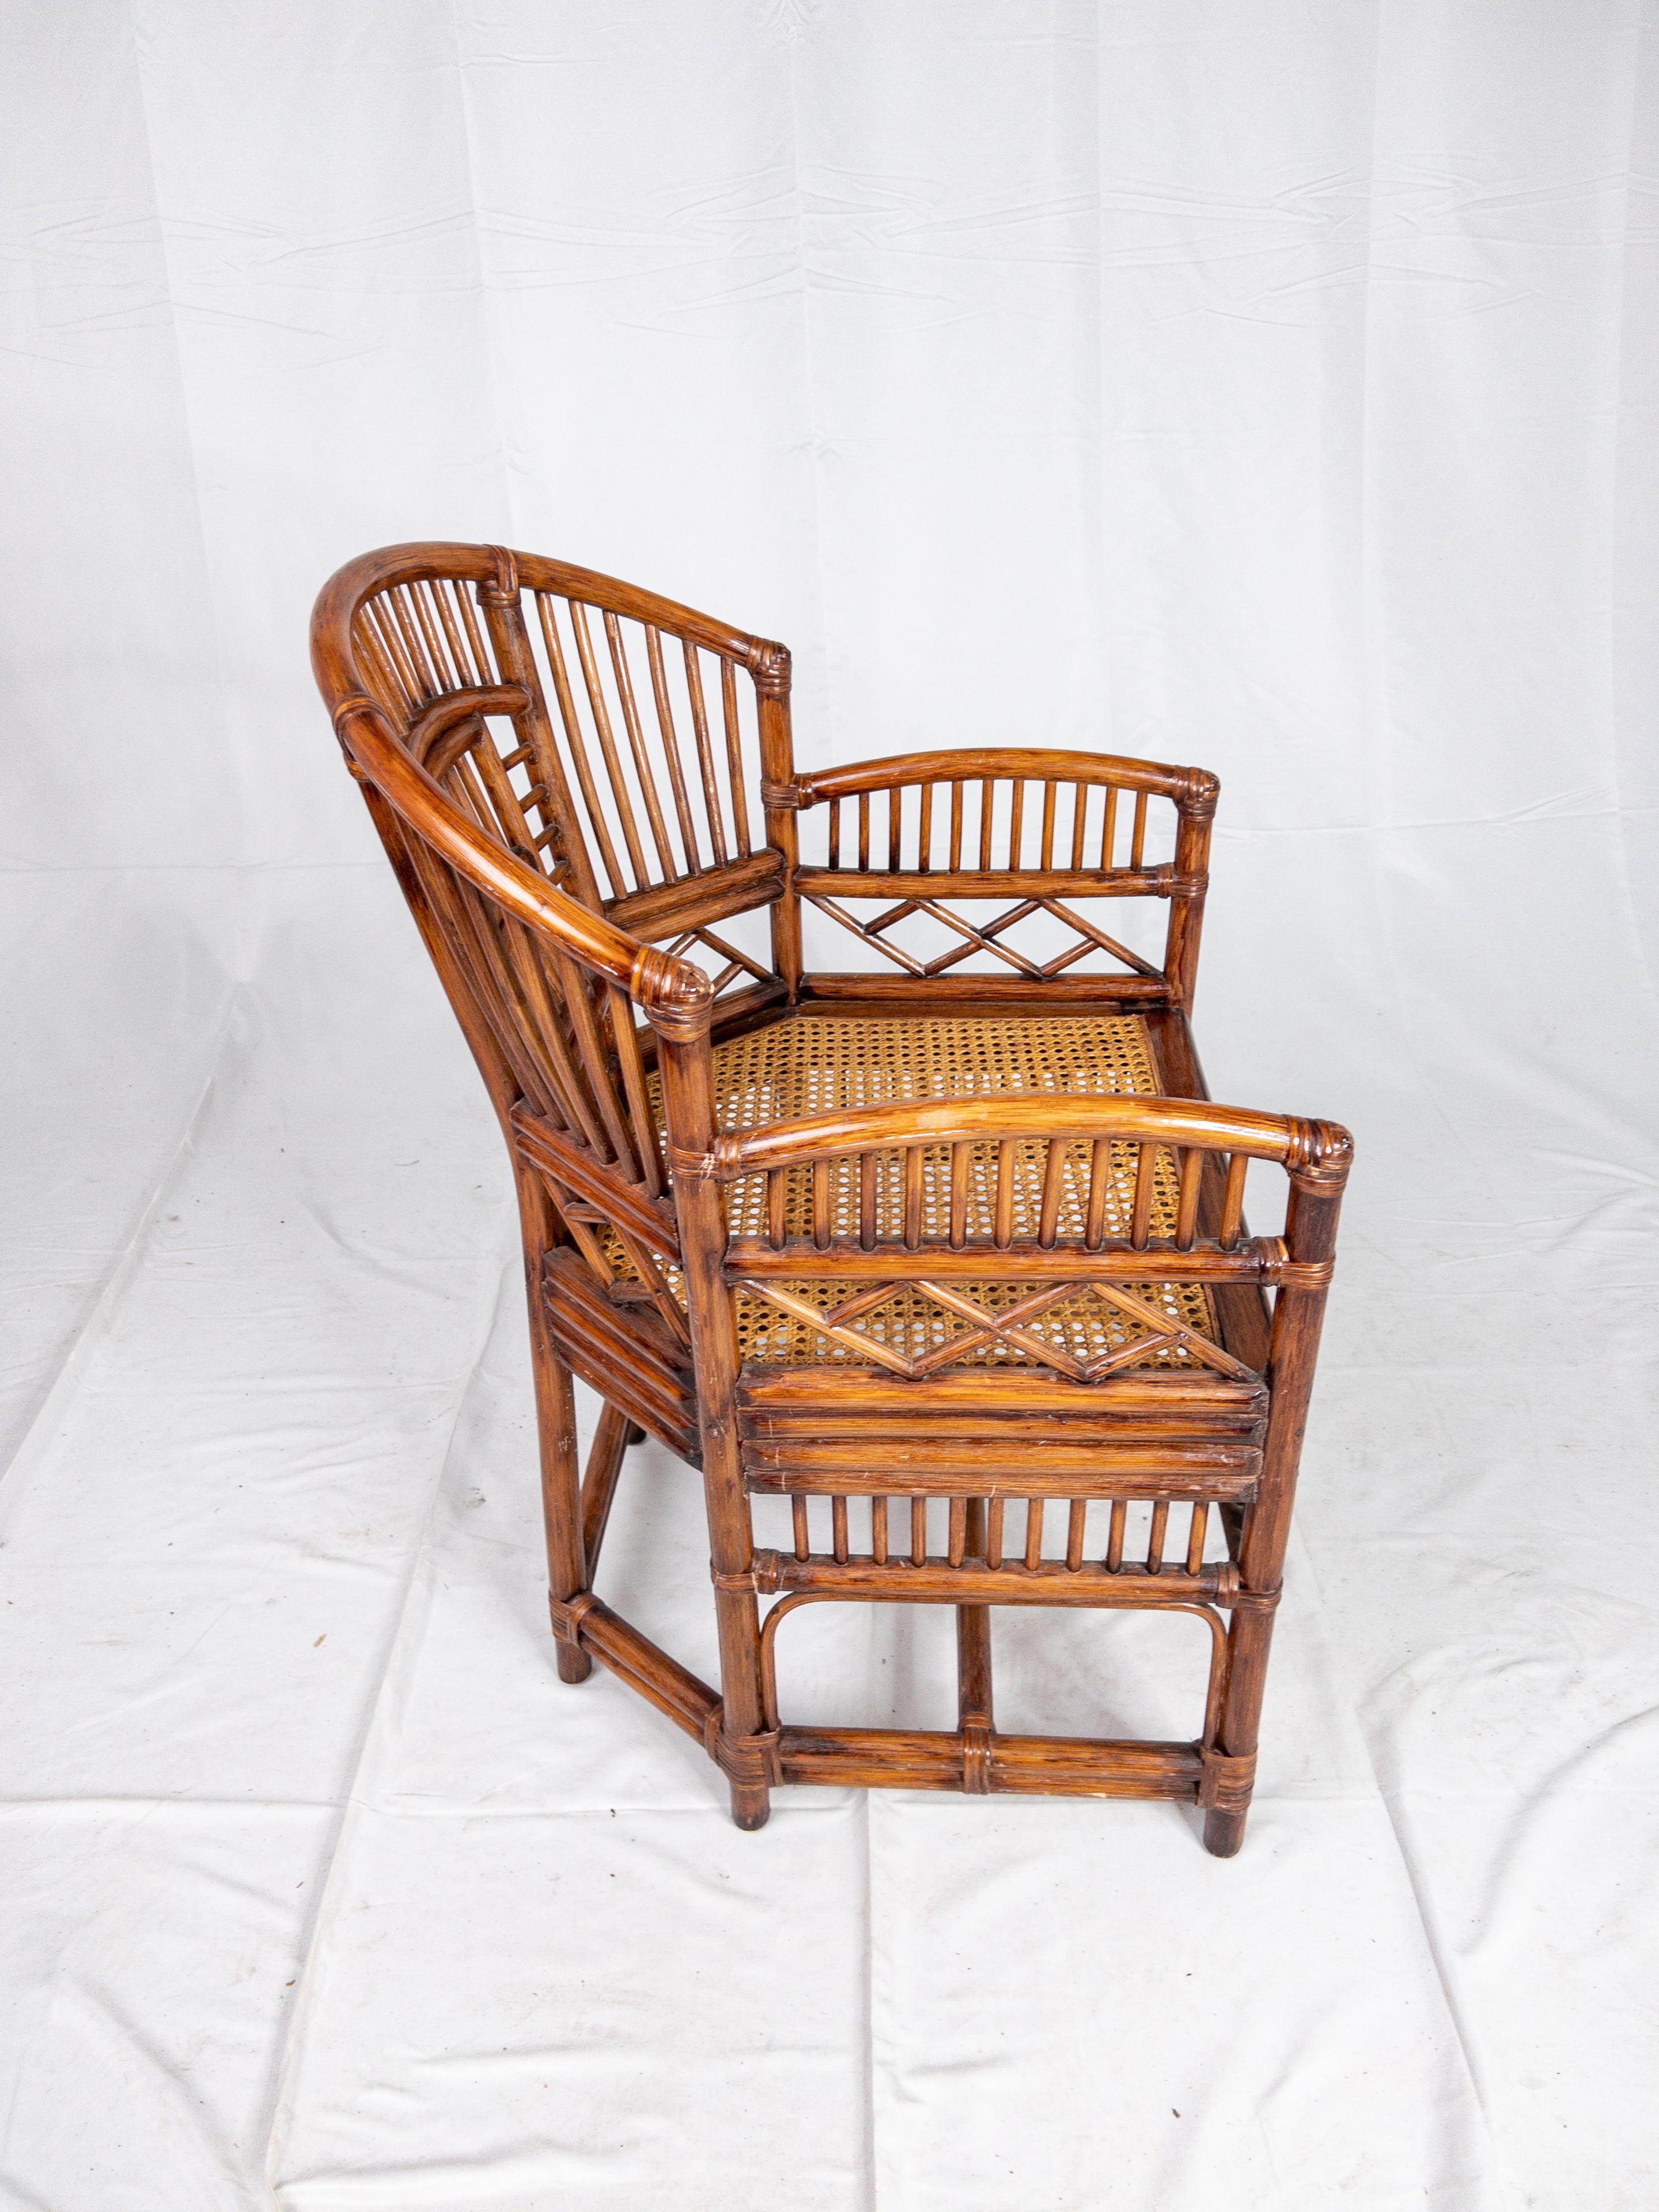 20th Century Vintage Brighton Scorched Bamboo Chippendale Chair with Rattan Seats